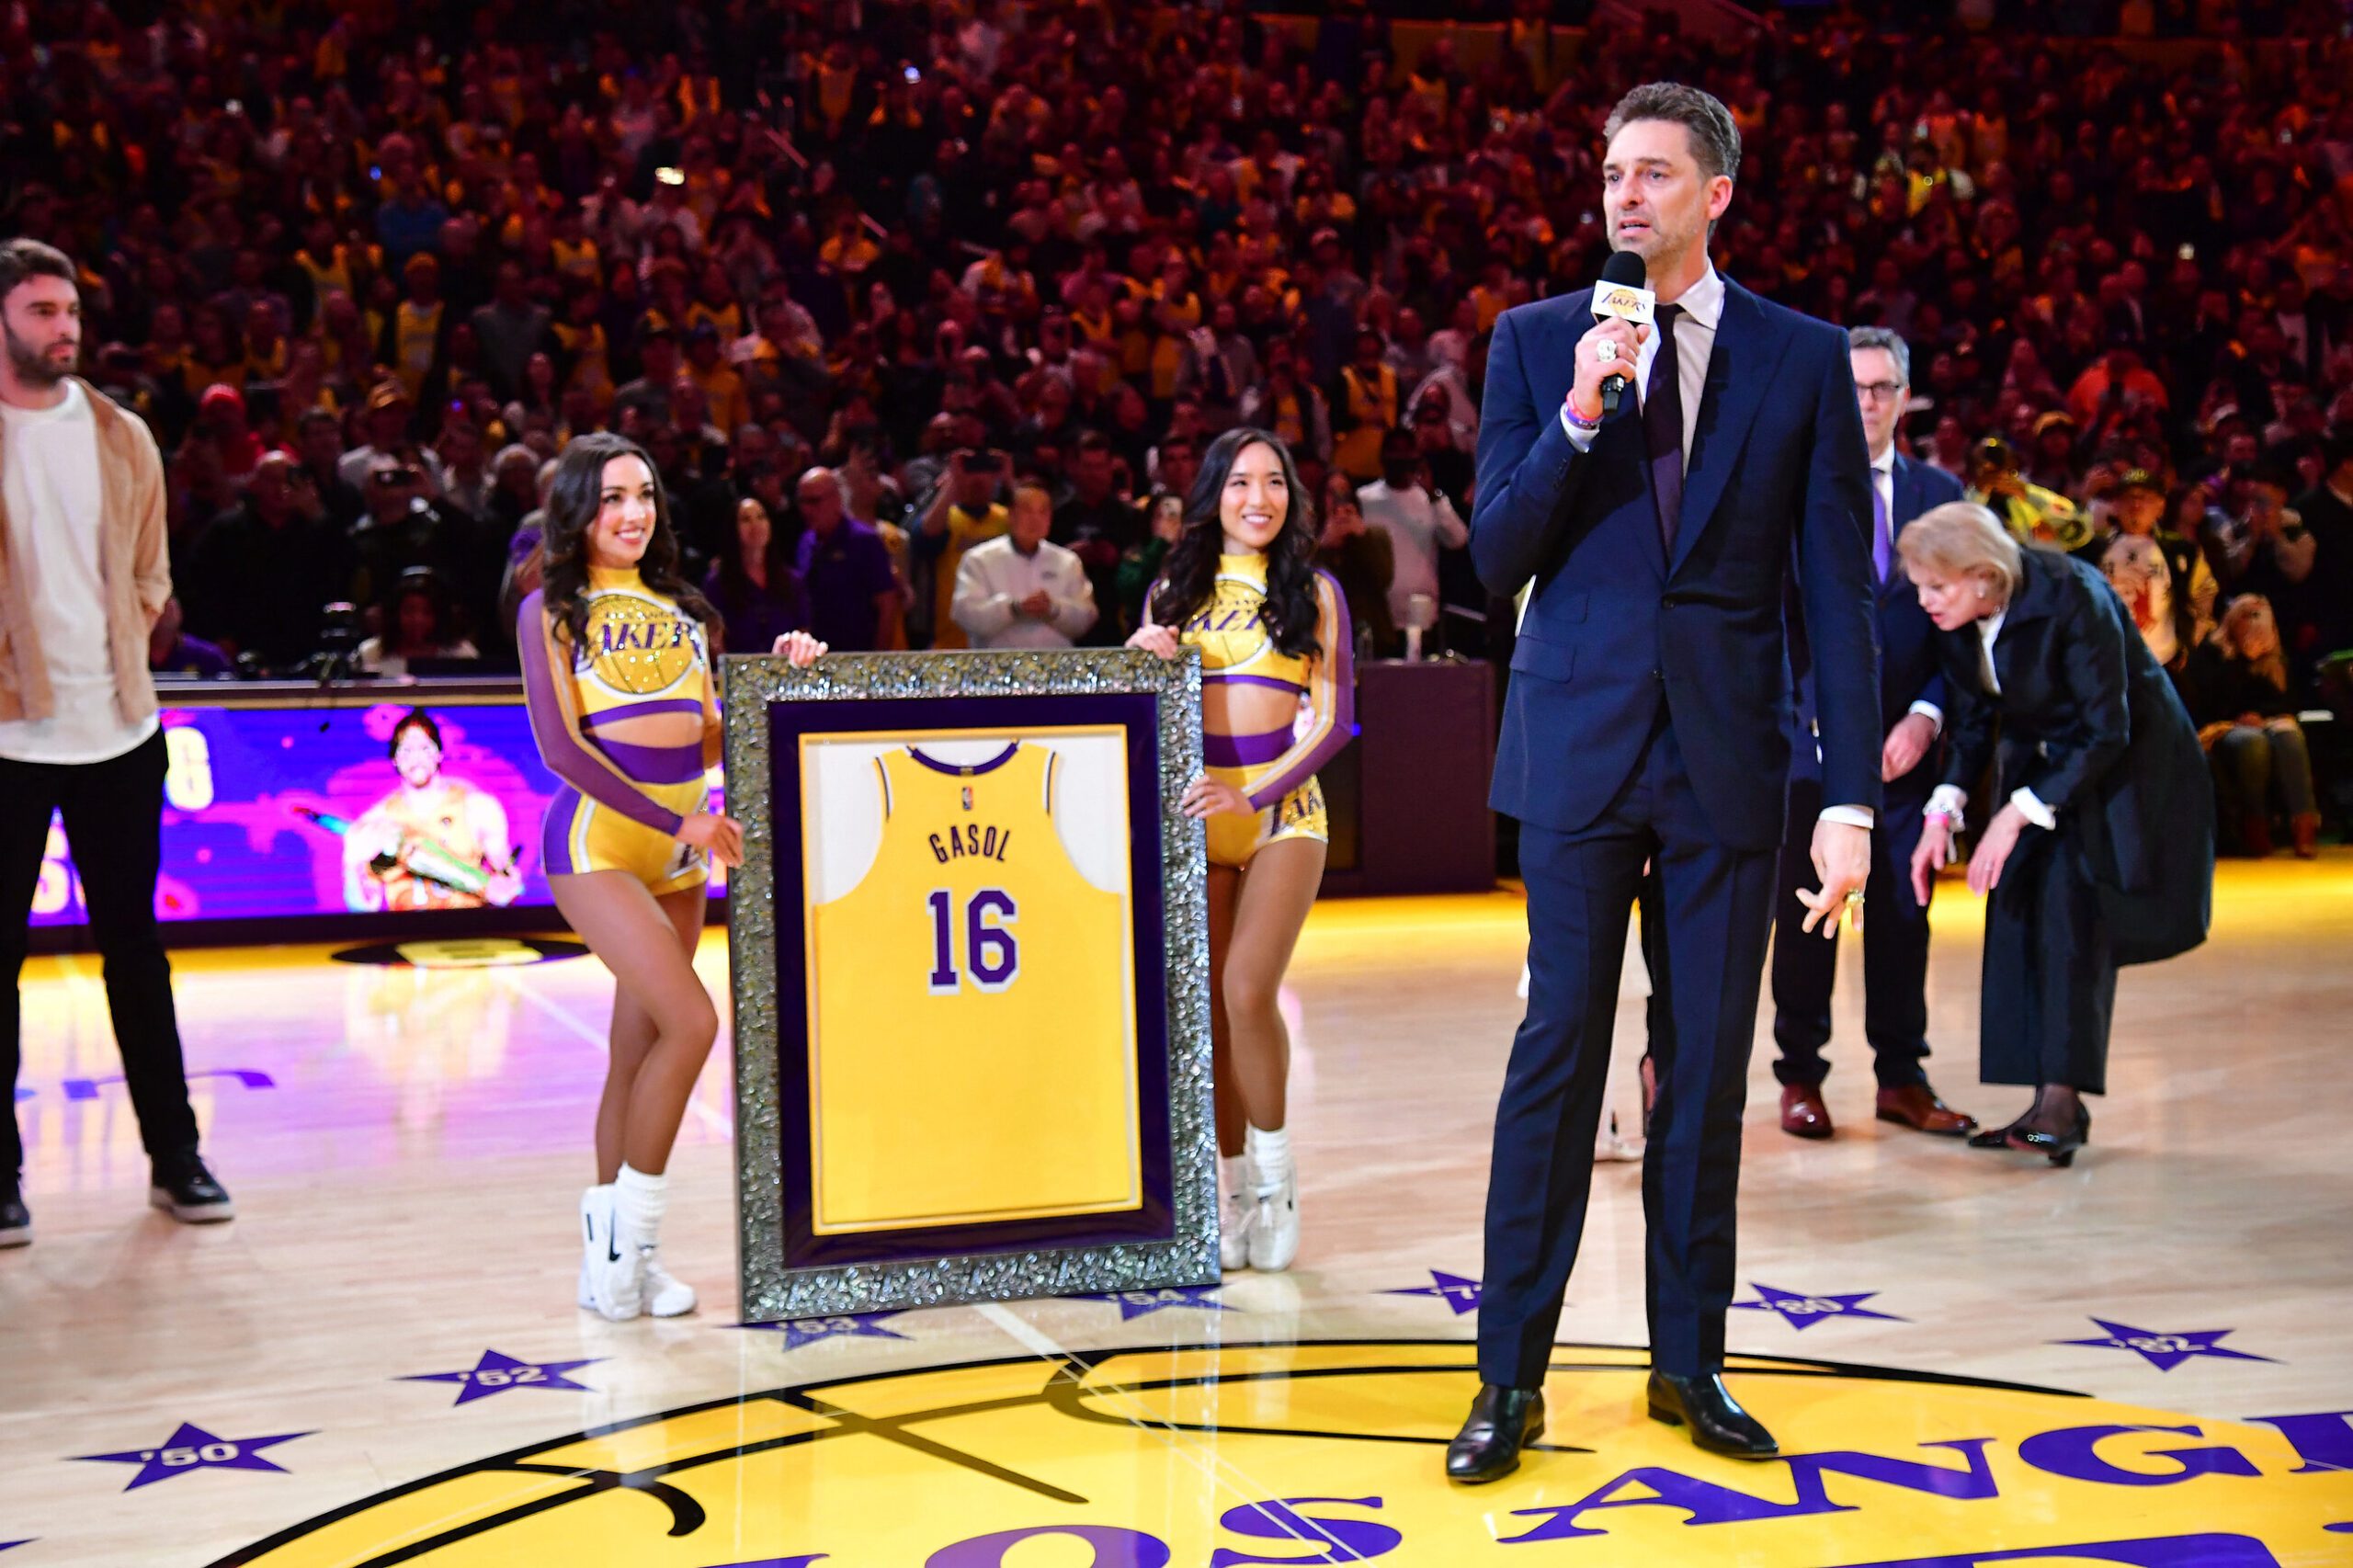 Gasol gets emotional as Lakers retire his No. 16